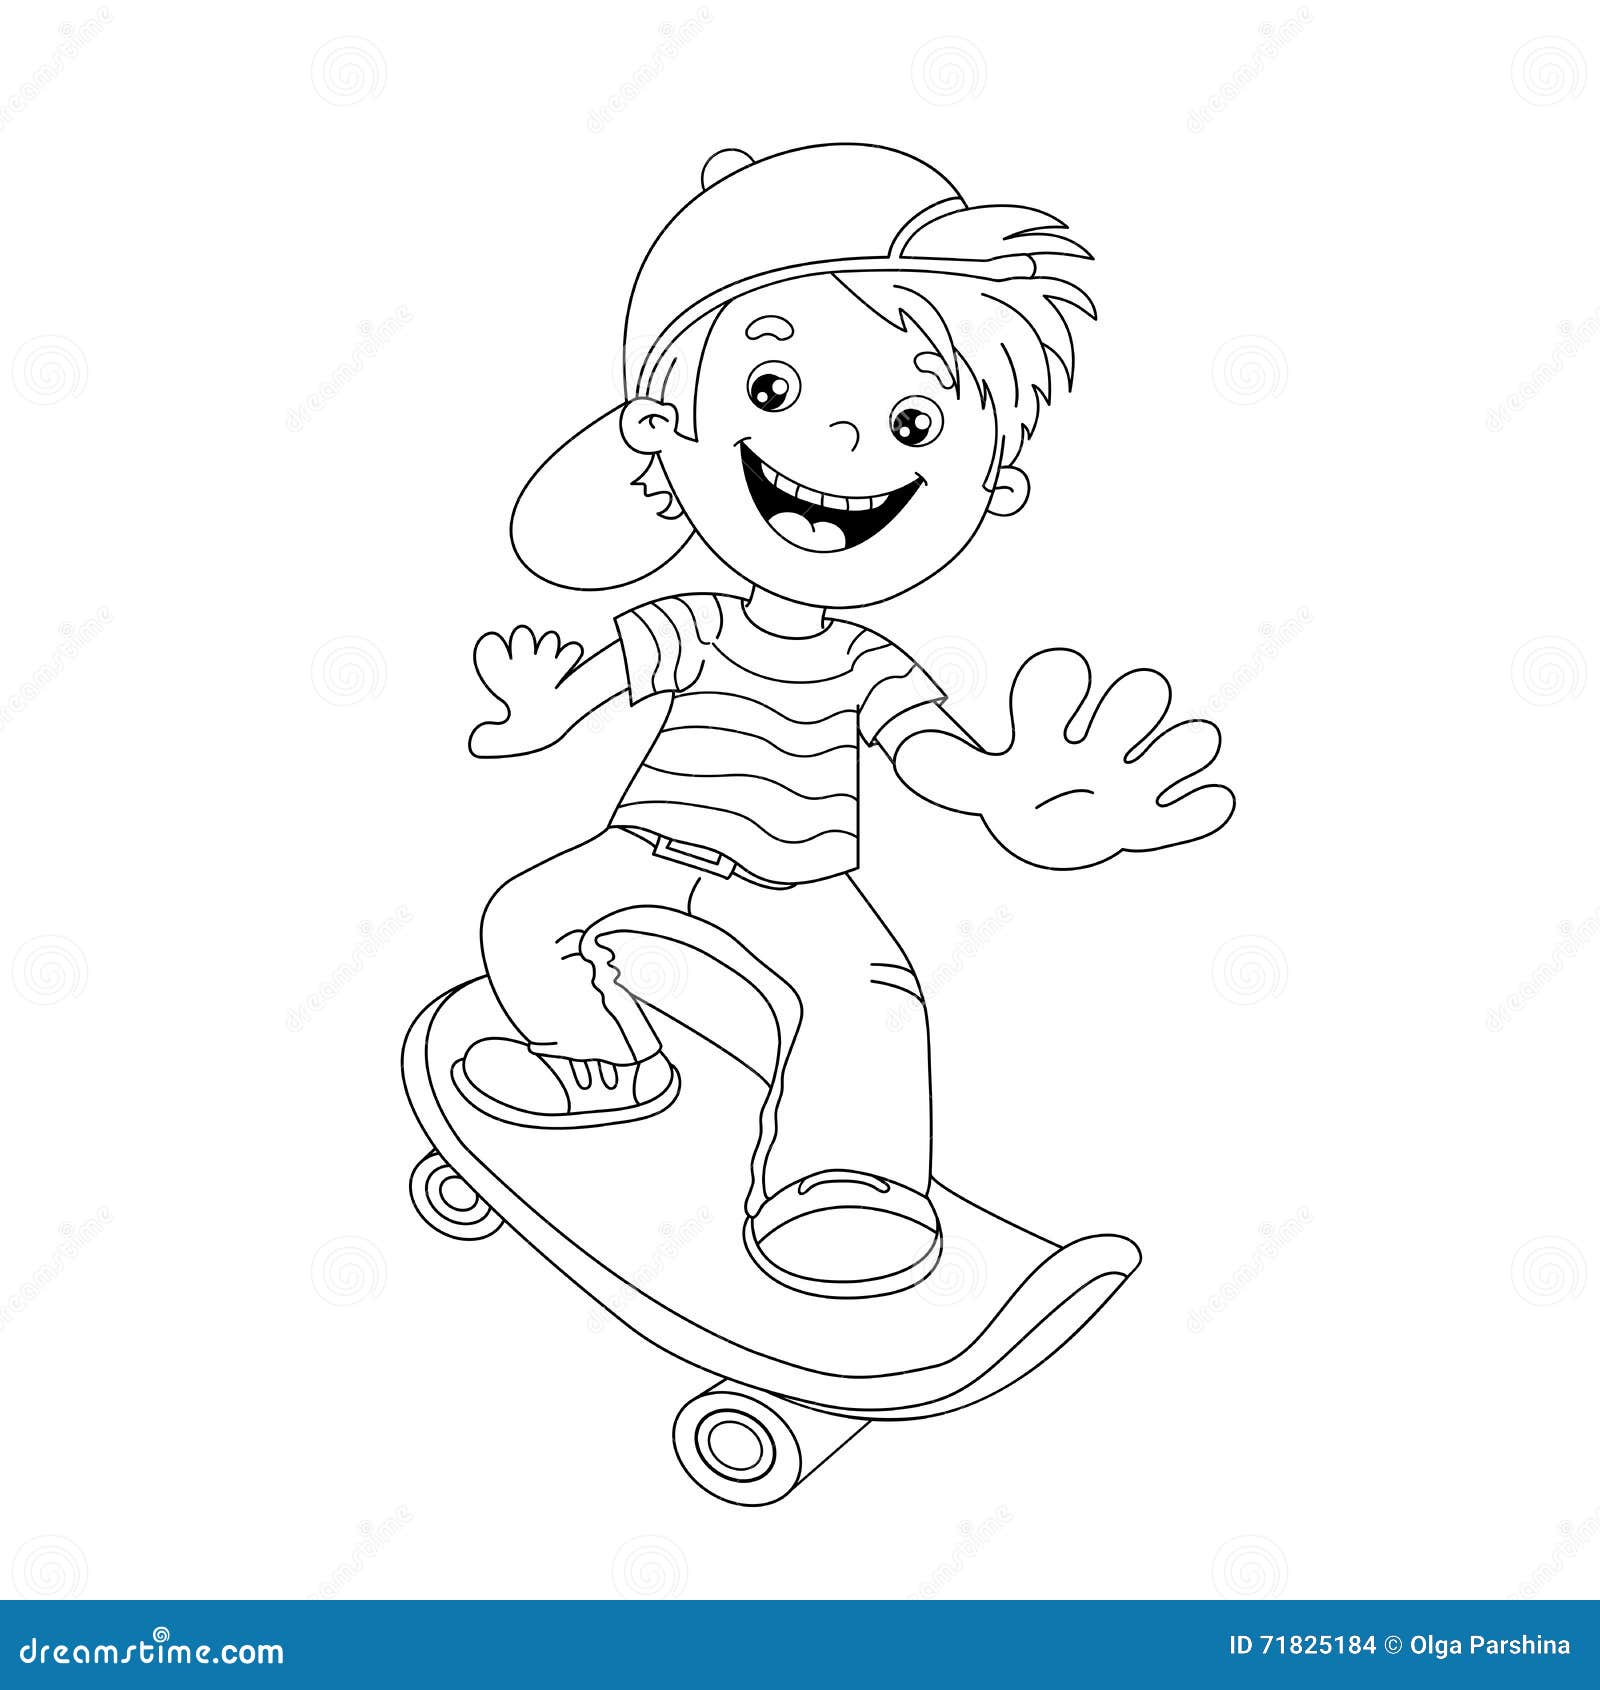 Coloring page outline of cartoon boy on the skateboard stock vector